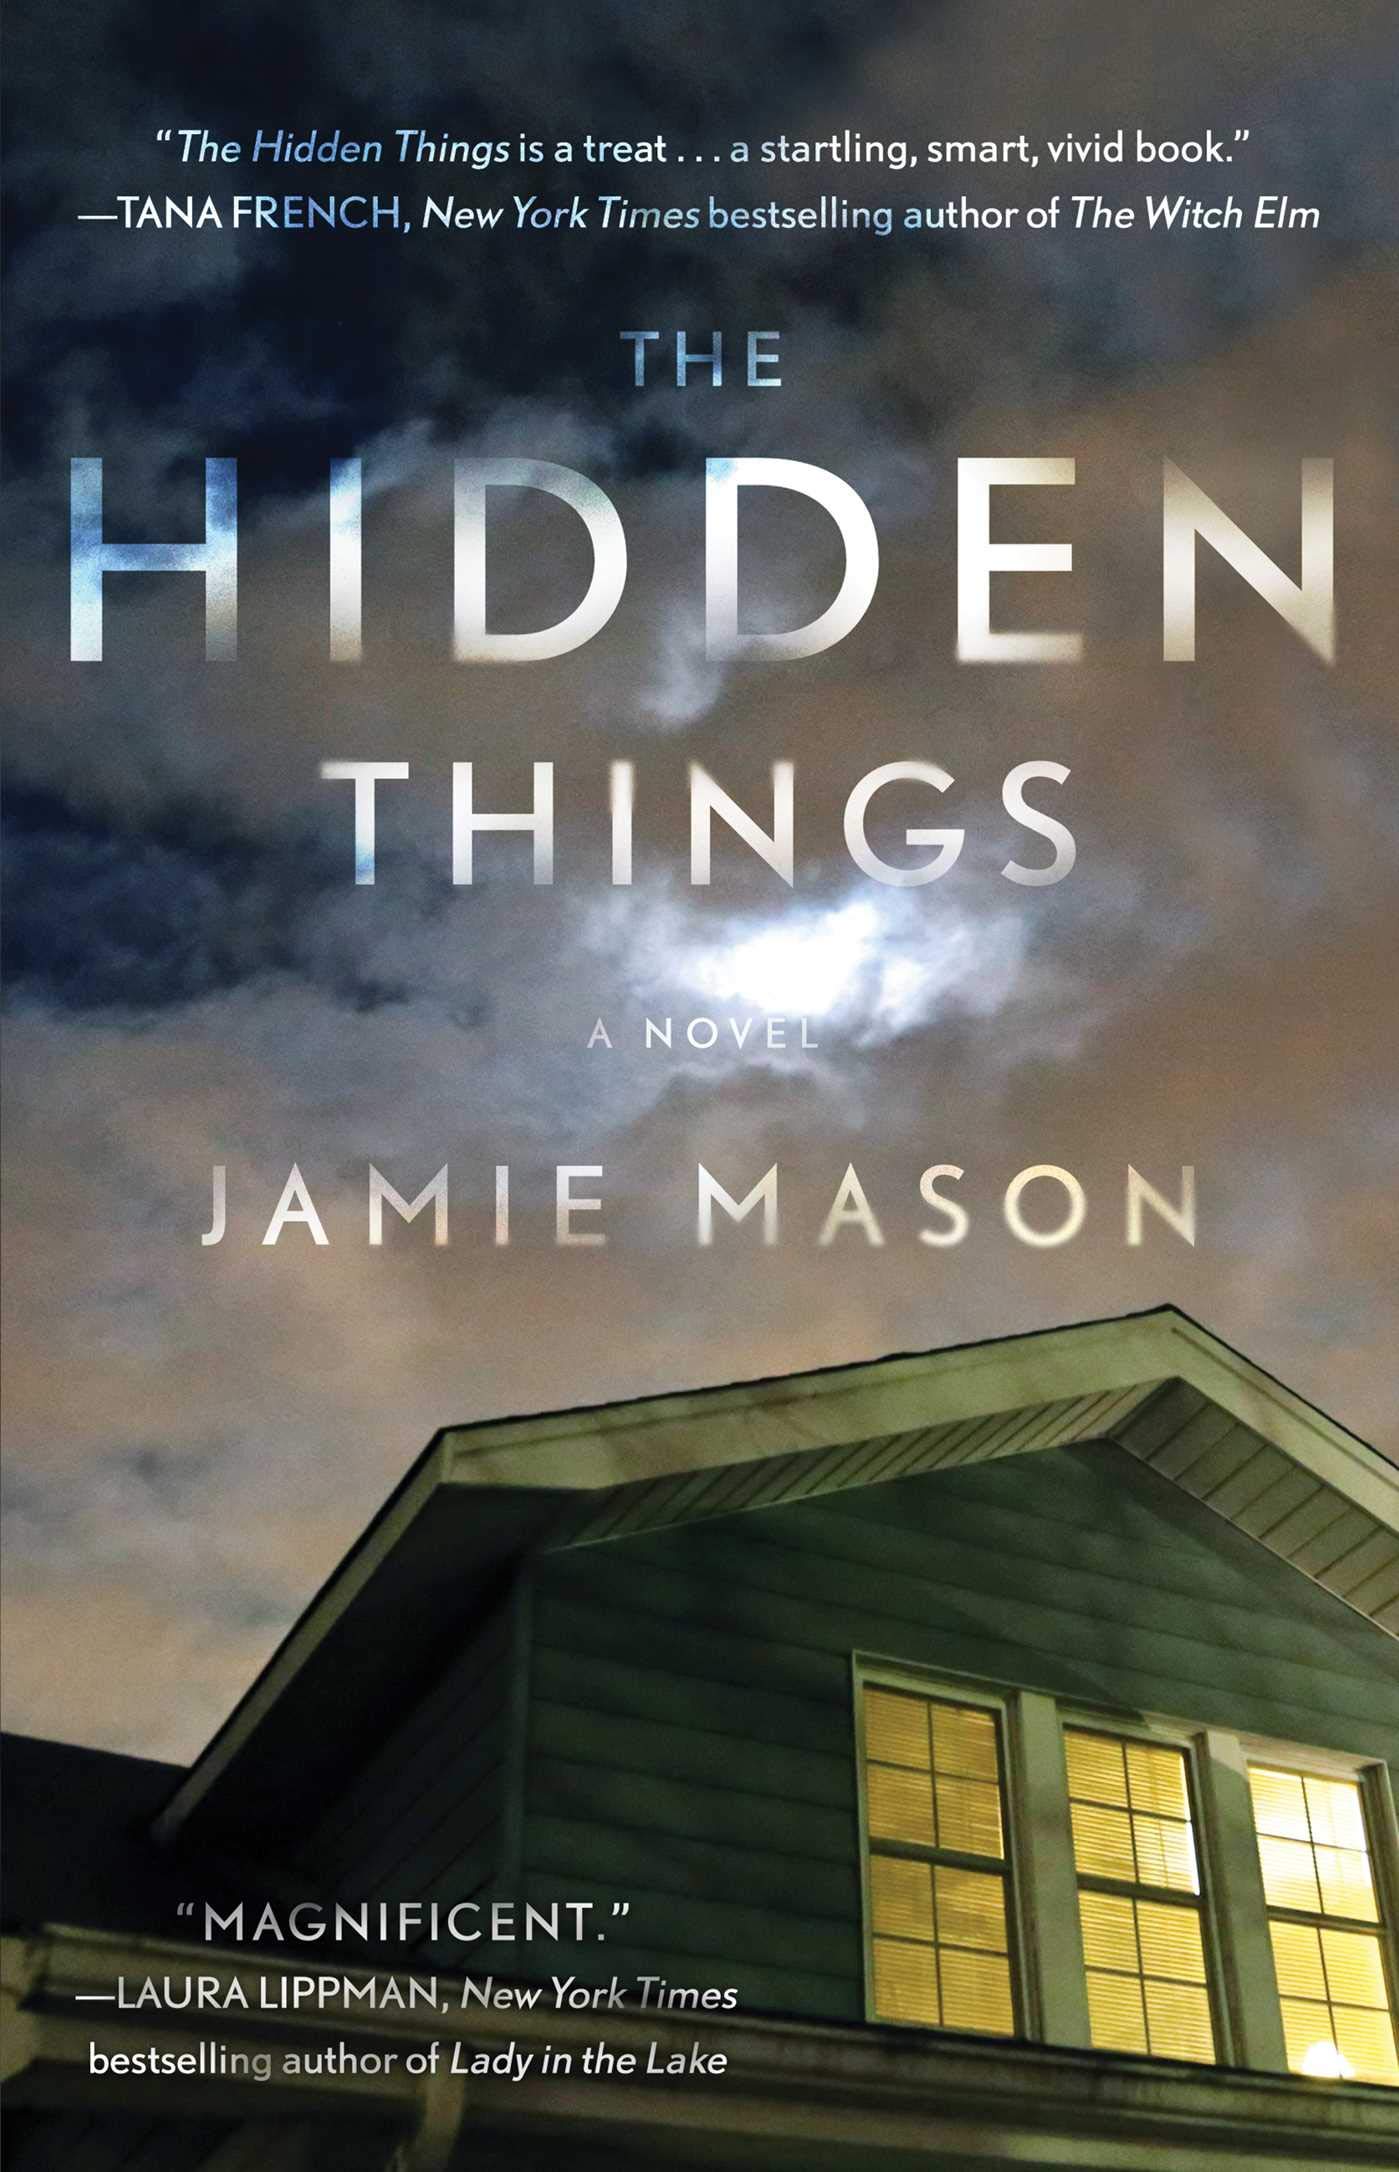 The Hidden Things Book Image